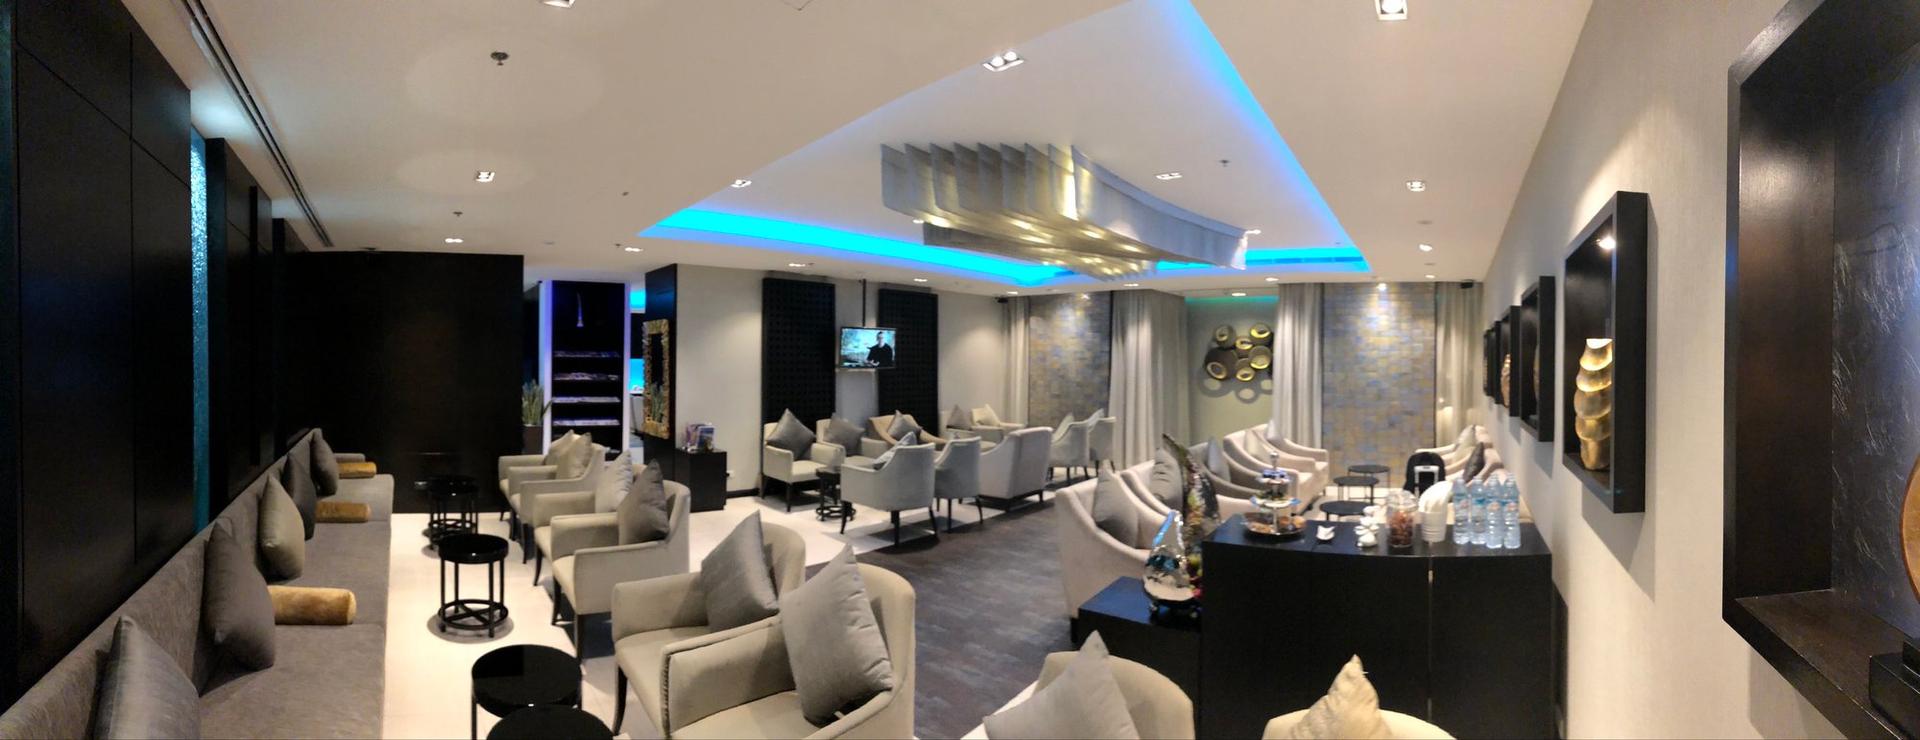 Oman Air First and Business Class Lounge image 19 of 50